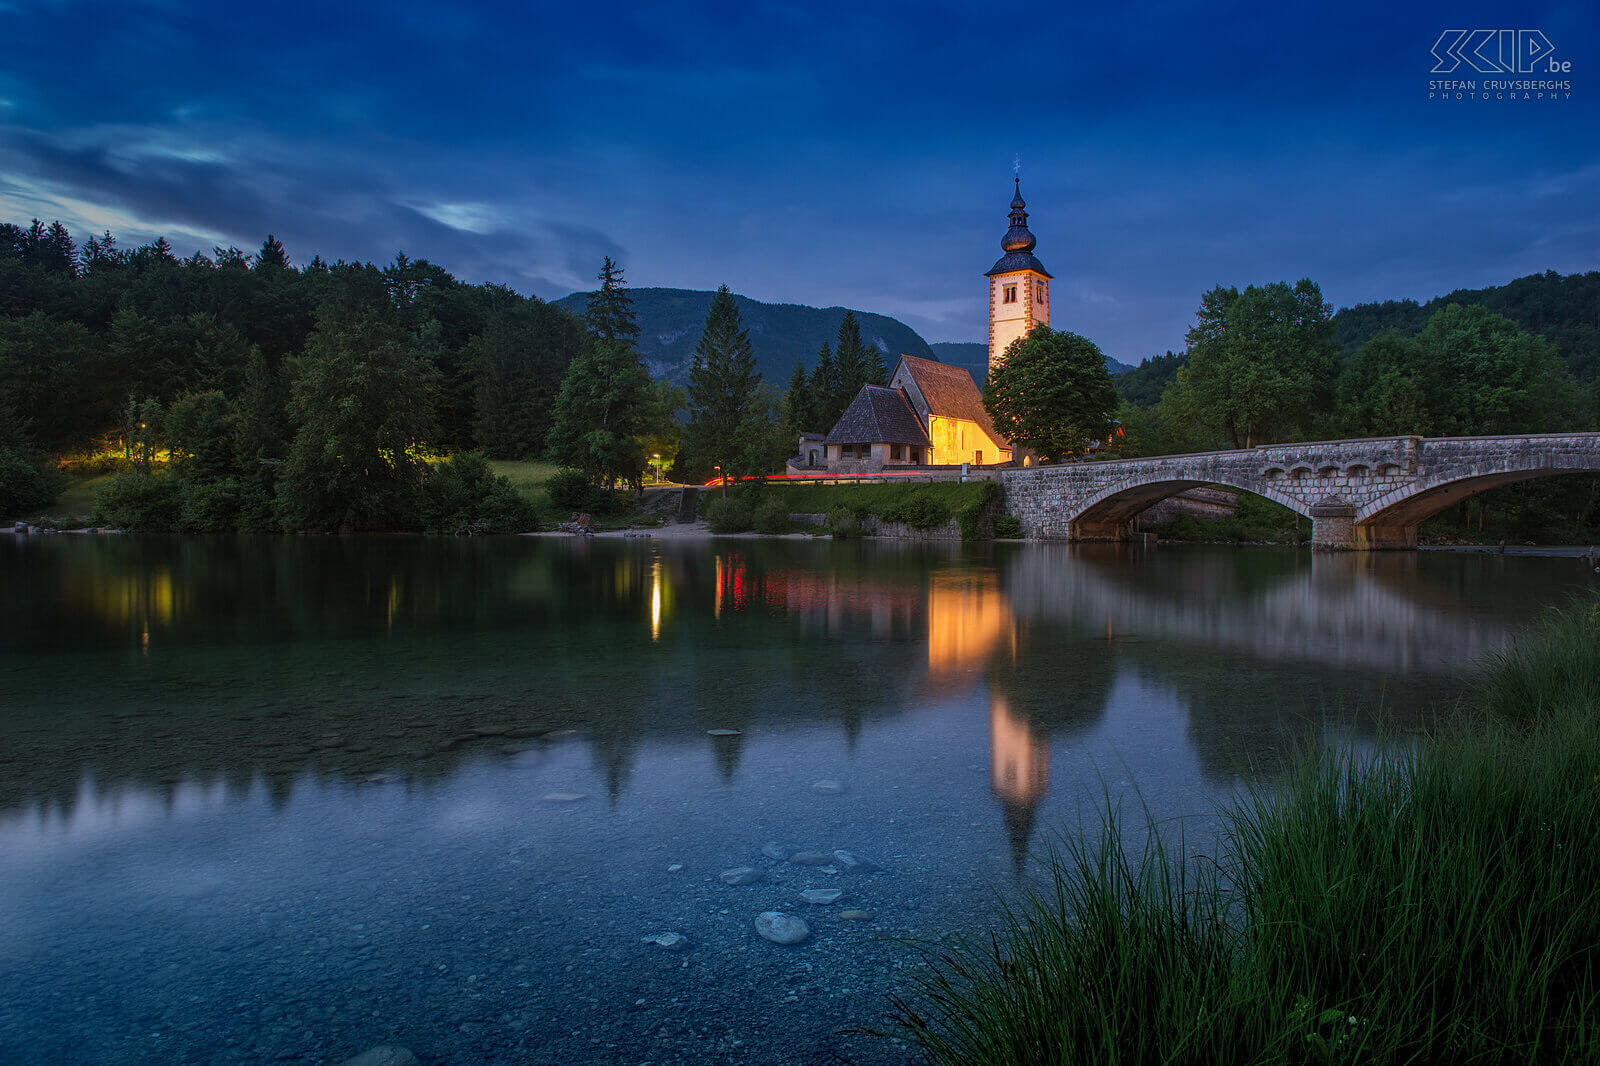 Lake Bohinj - Ribcev laz by night Lake Bohinj is one of the most beautiful lakes in Slovenia. On the bank near the village of Ribcev laz is the old bridge and the Johannes church. Stefan Cruysberghs